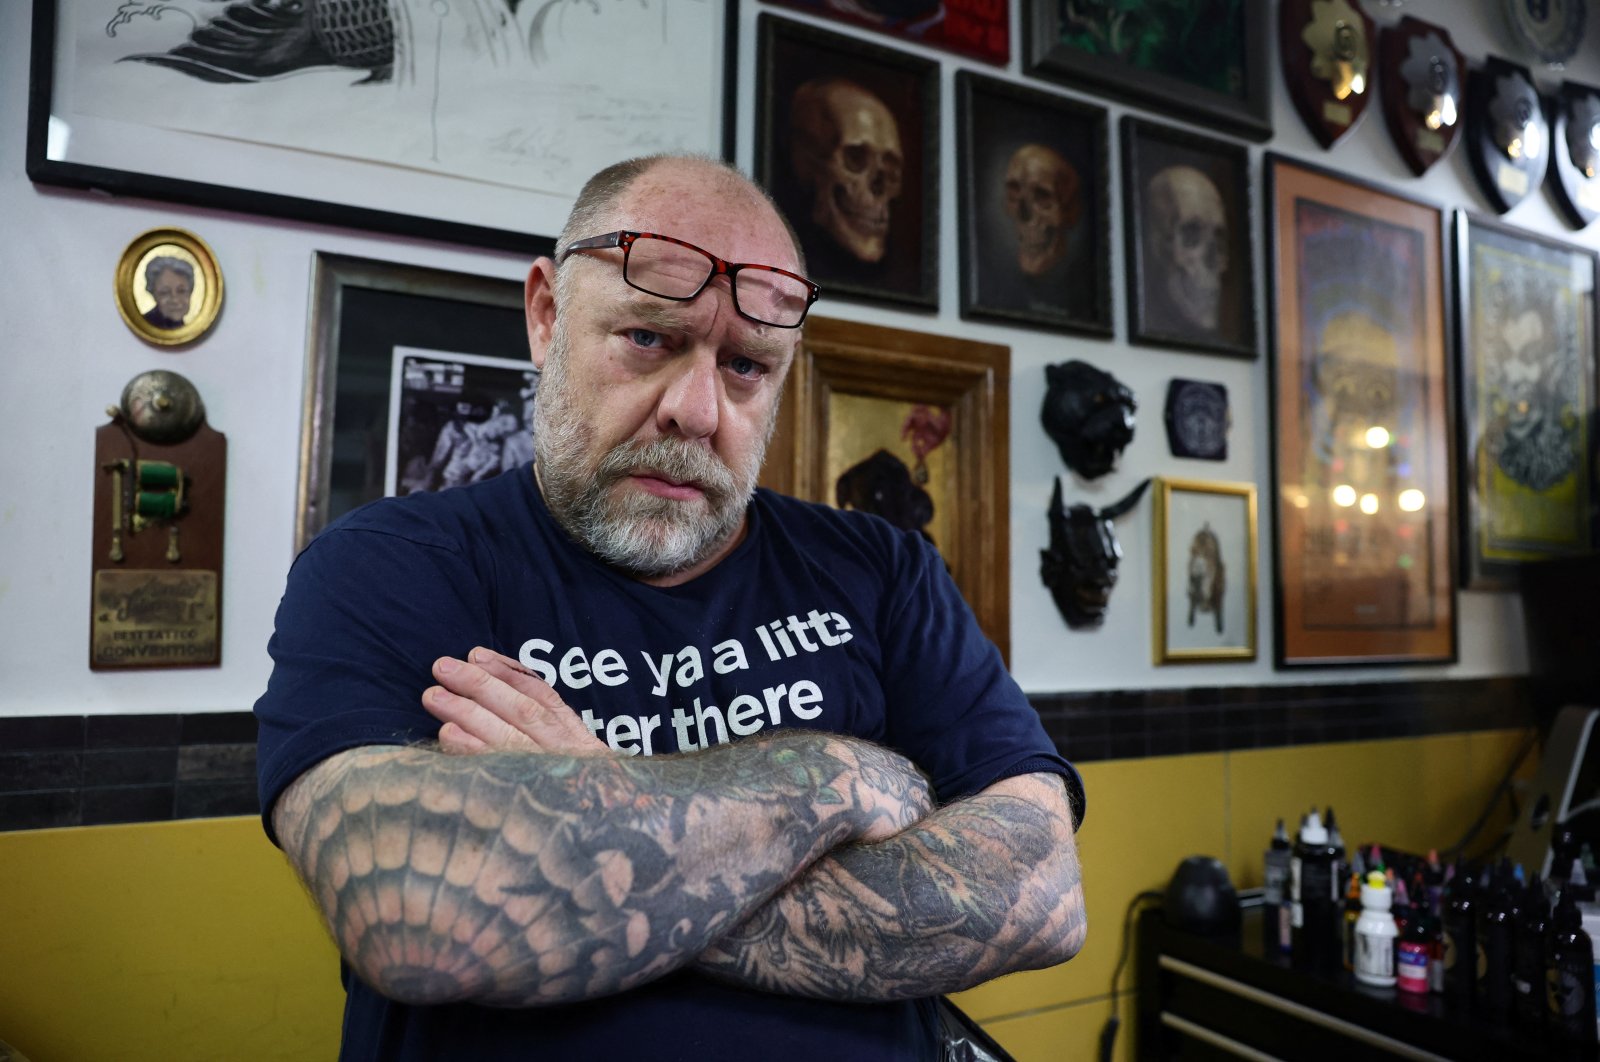 Tattoo artist Tin-Tin, head of the French National Union of Tattoo Artists, poses in his tattoo studio as new EU restrictions on colored tattoos come into force in Paris, France, Jan. 4, 2022. (Reuters Photo)